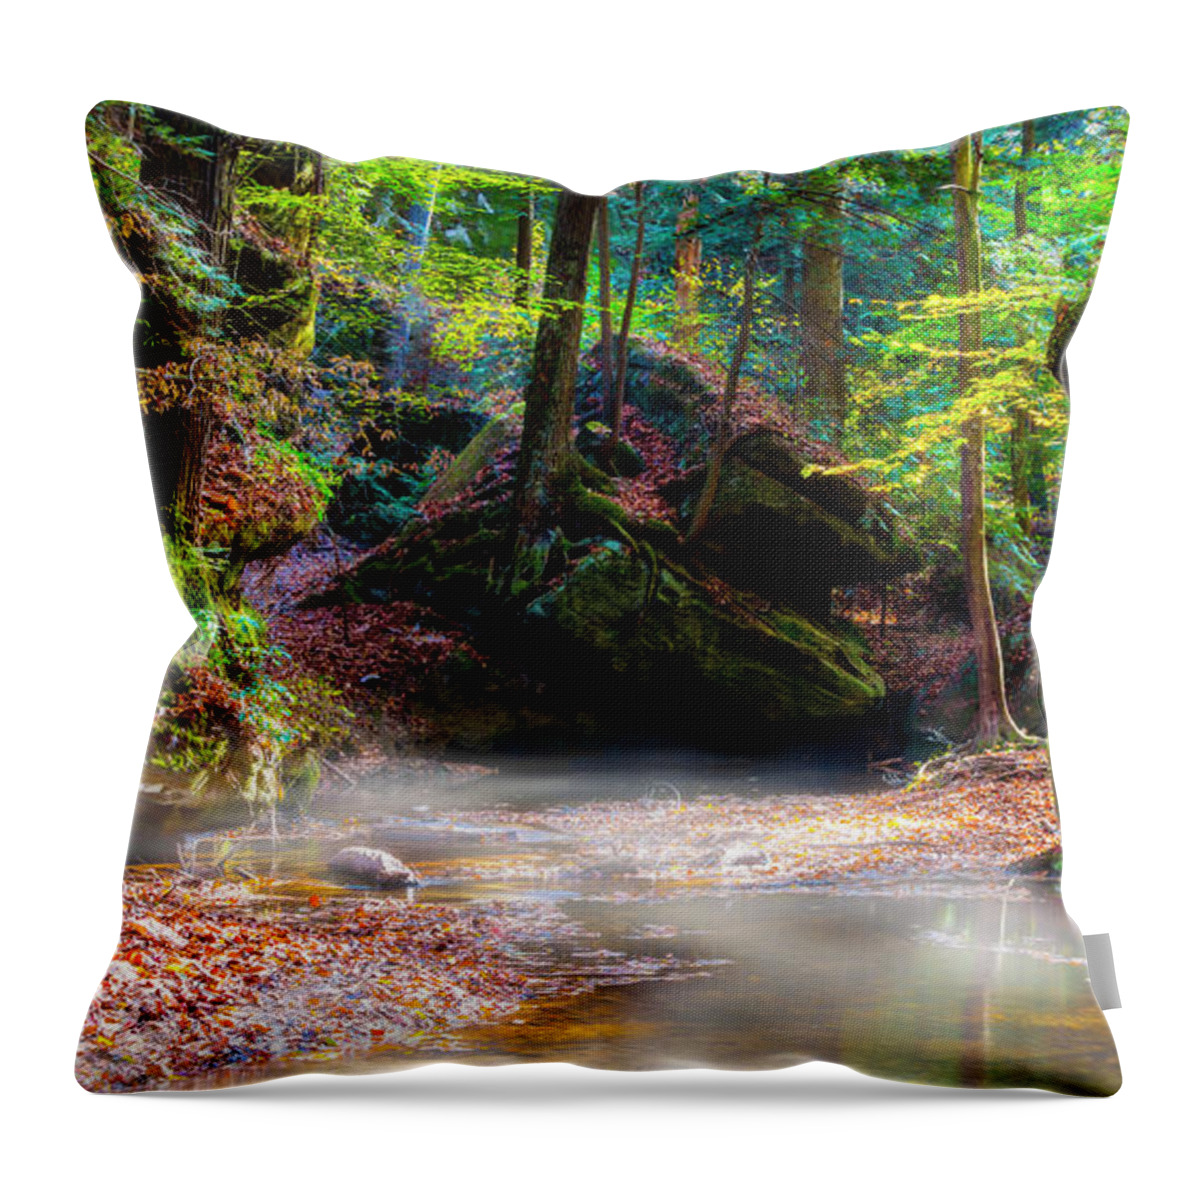 Canyon Throw Pillow featuring the photograph Tranquil Mist by David Morefield